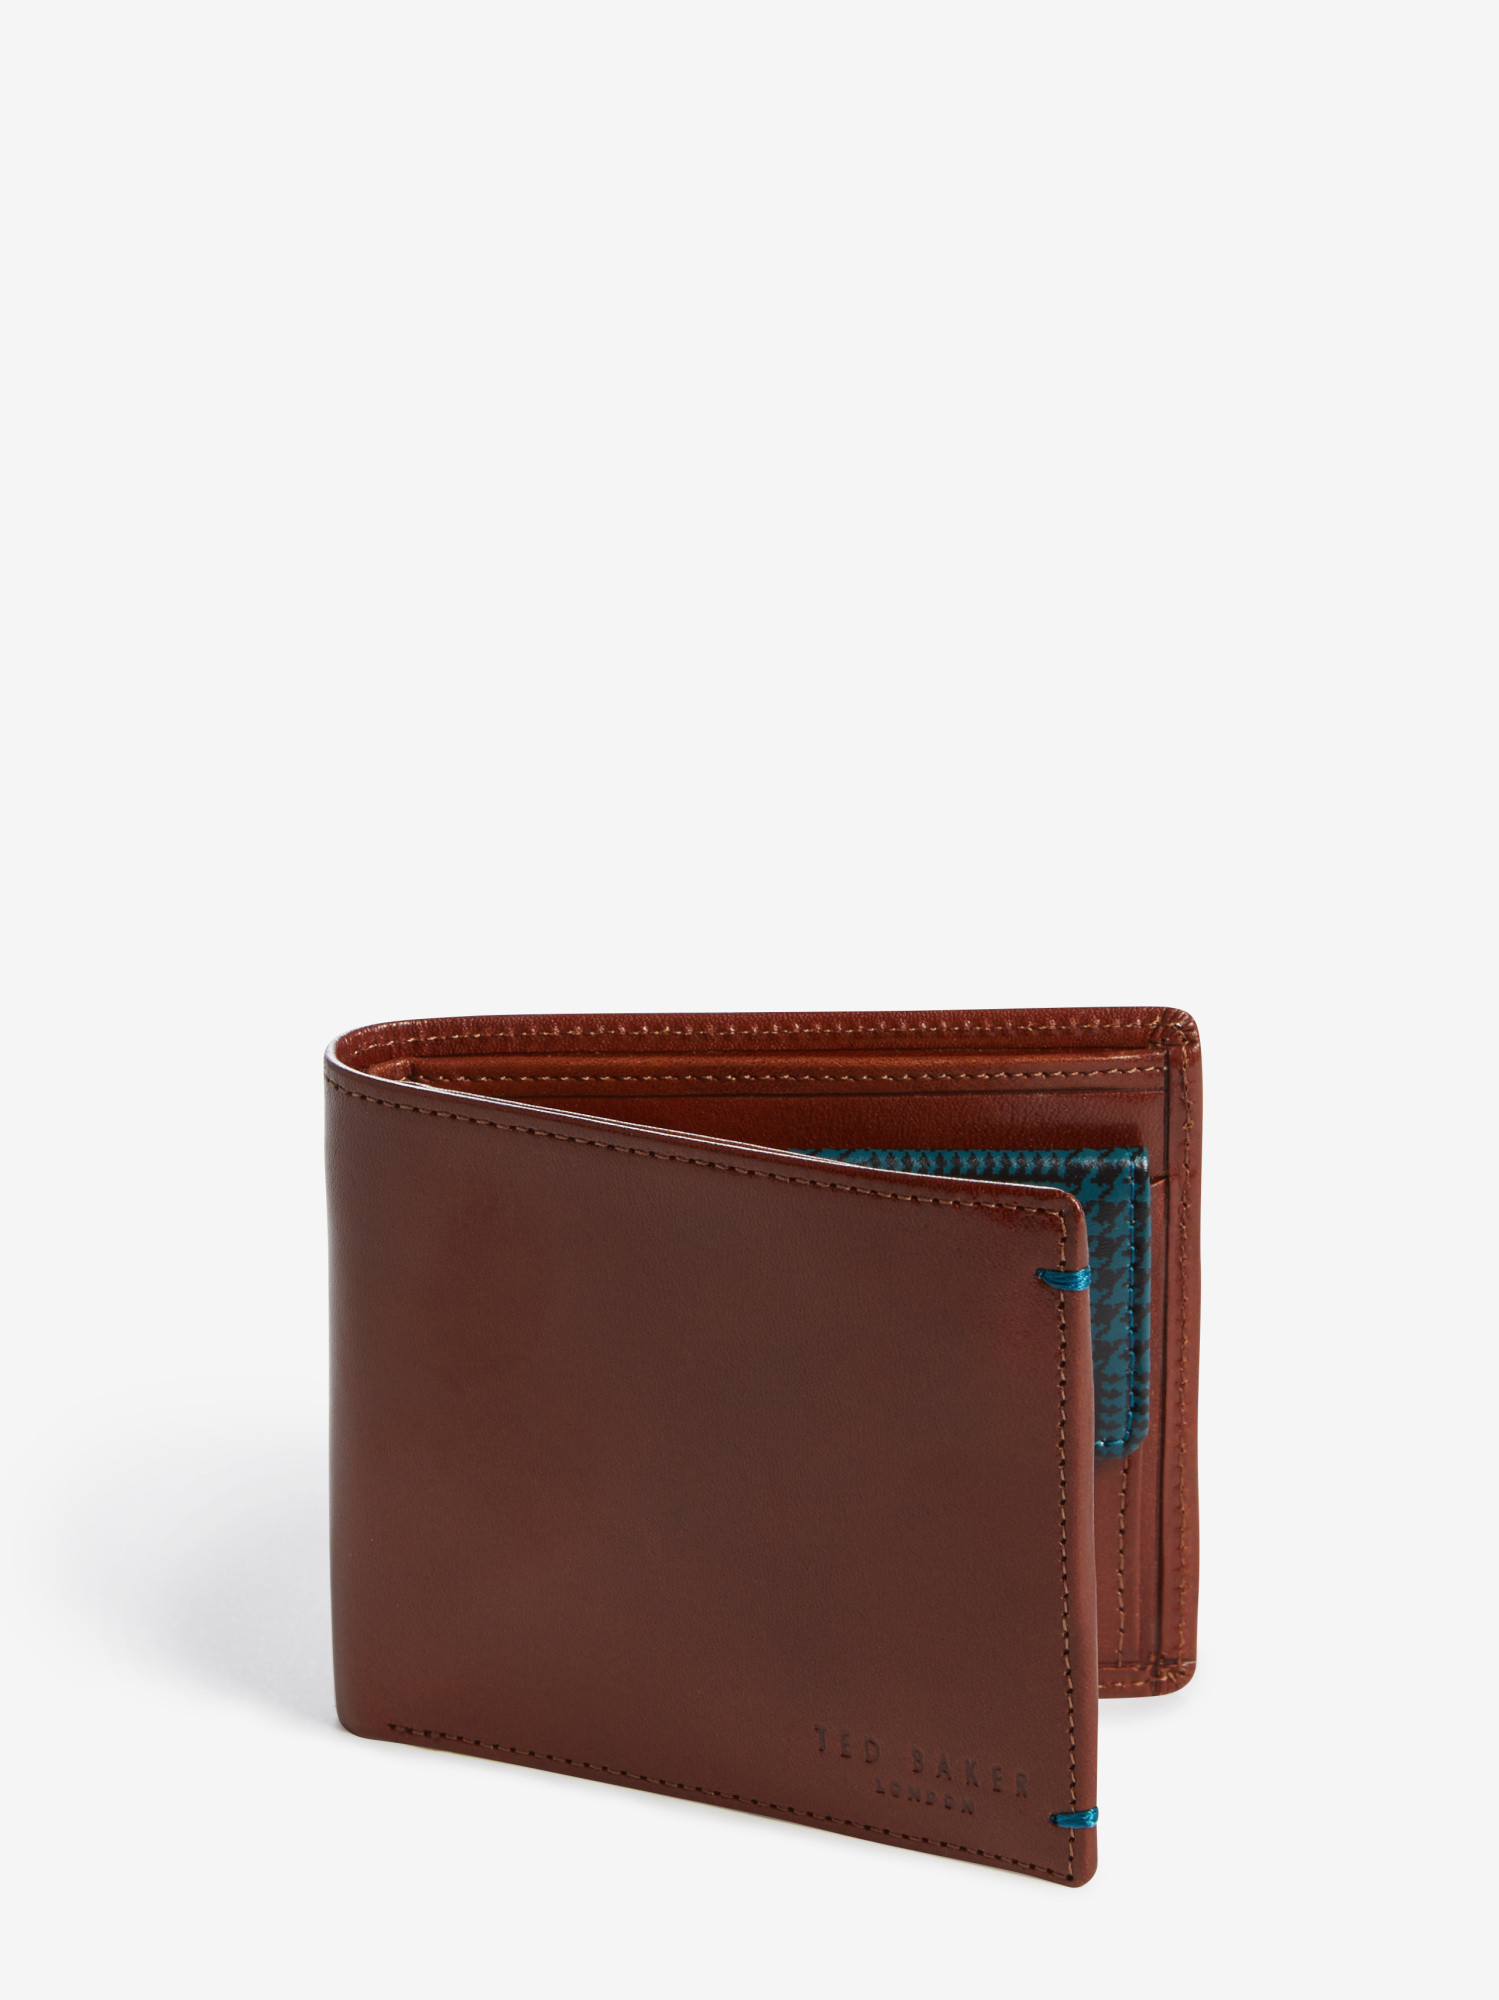 Lyst - Ted Baker Leather Wallet With Coin Holder in Brown for Men